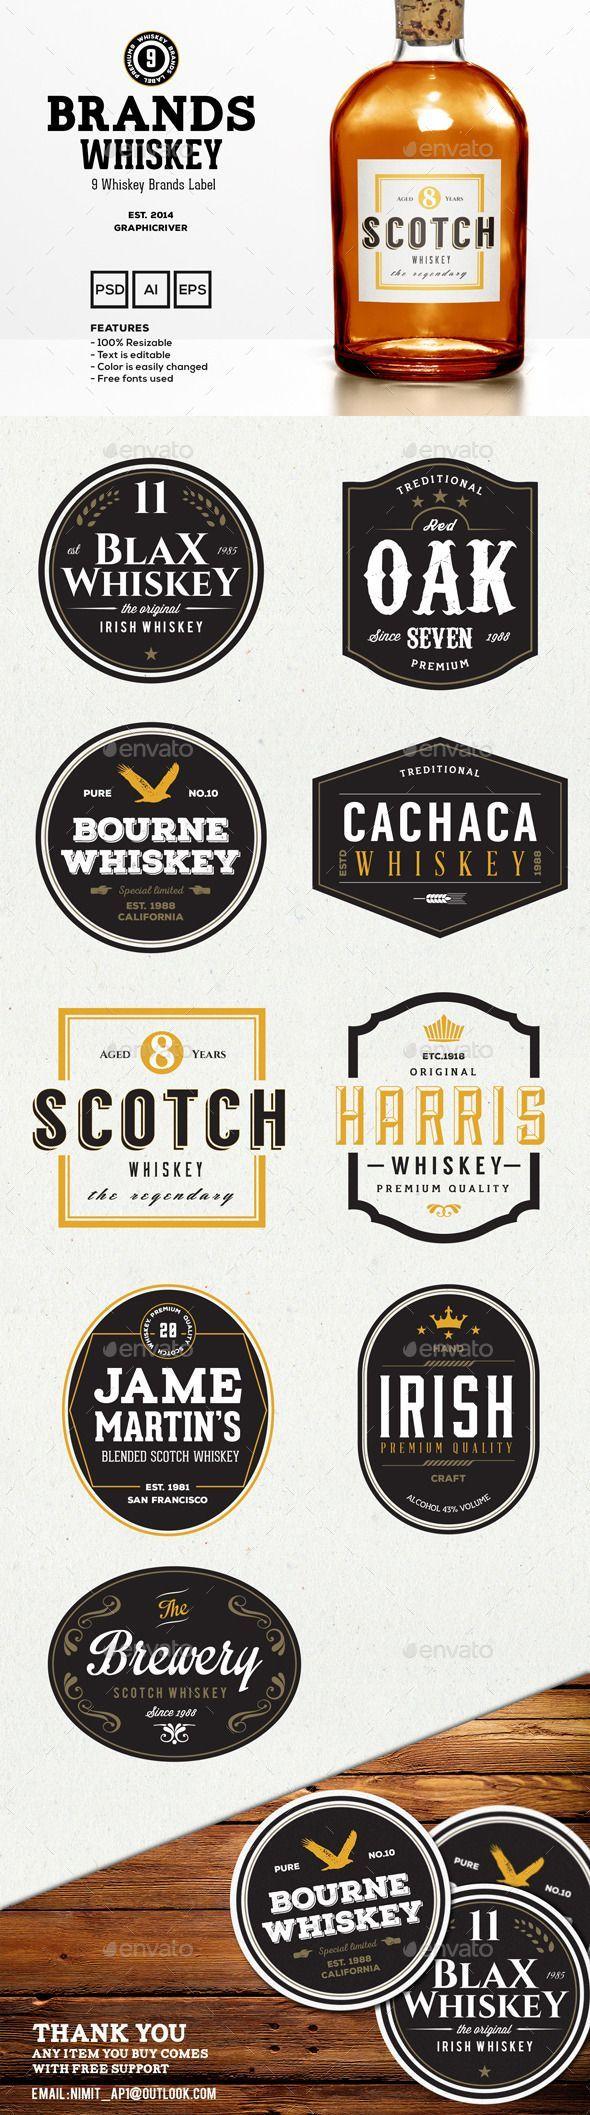 Whiskey Brand Logo - Pin by best Graphic Design on Badges - Sticker Template | Whiskey ...